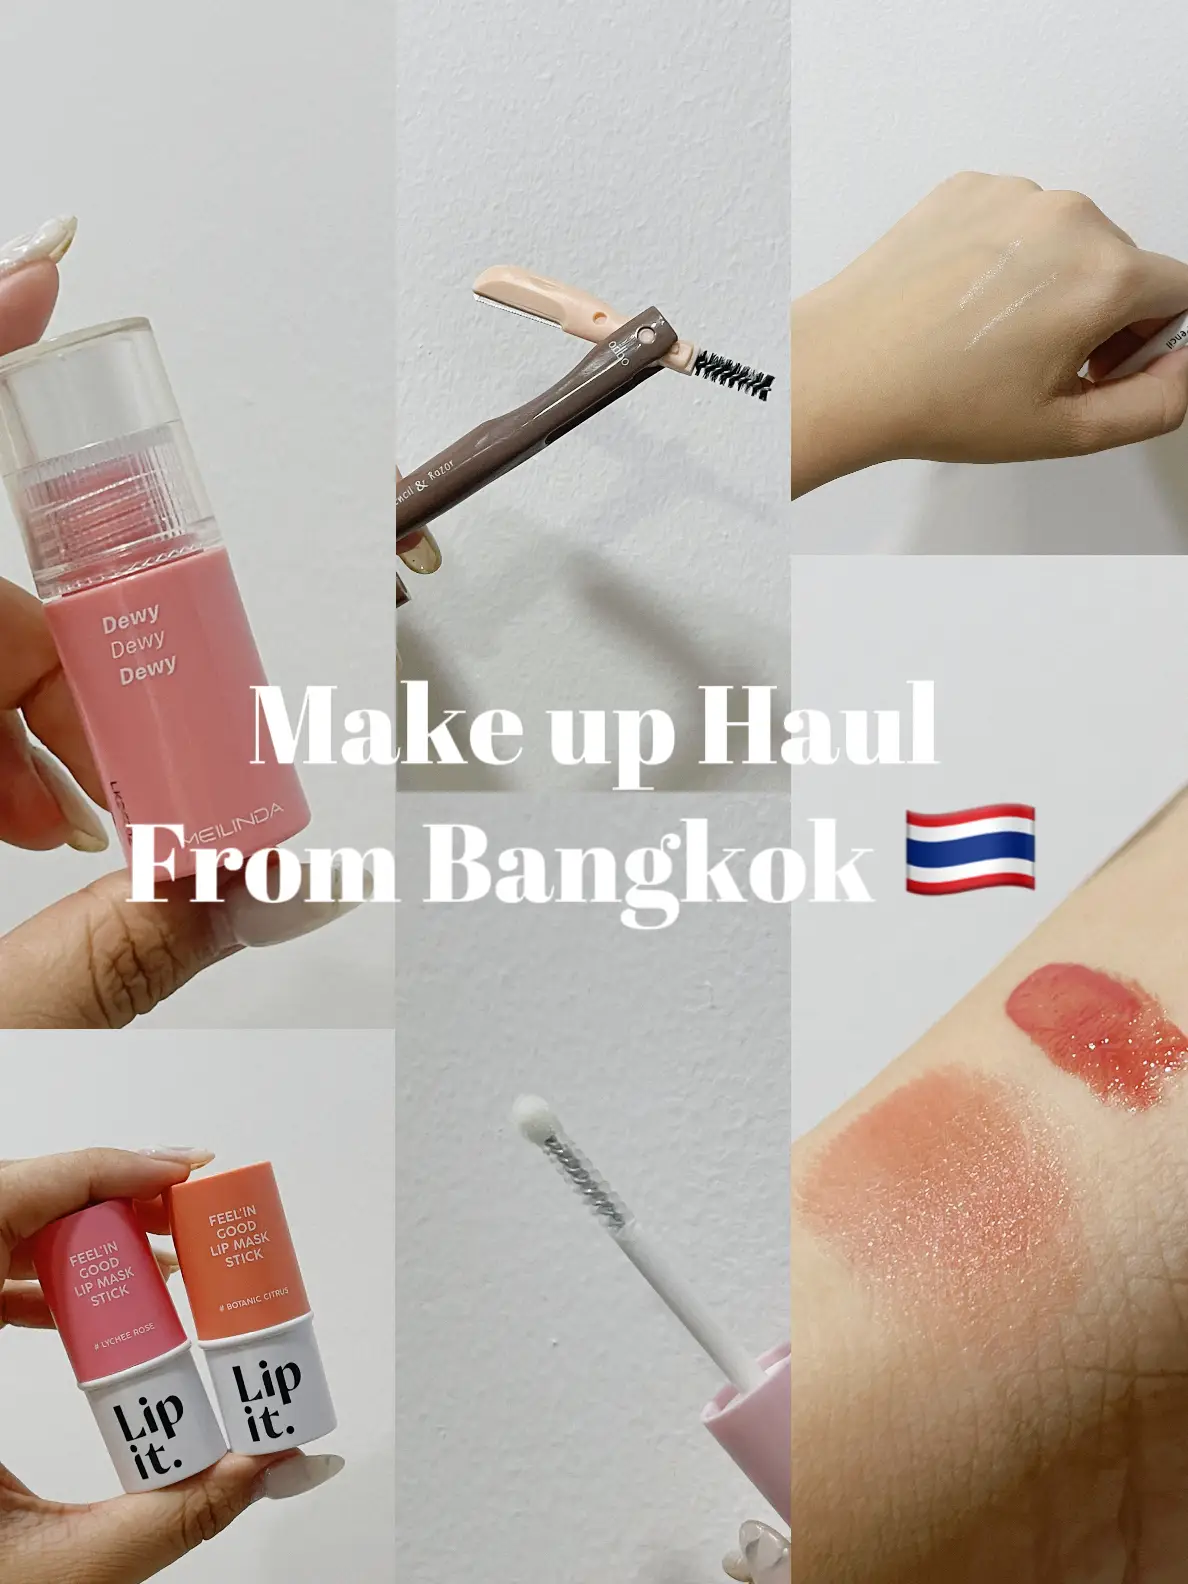 What I bought from Bangkok 🇹🇭 ｜ Beauty Haul 💄 's images